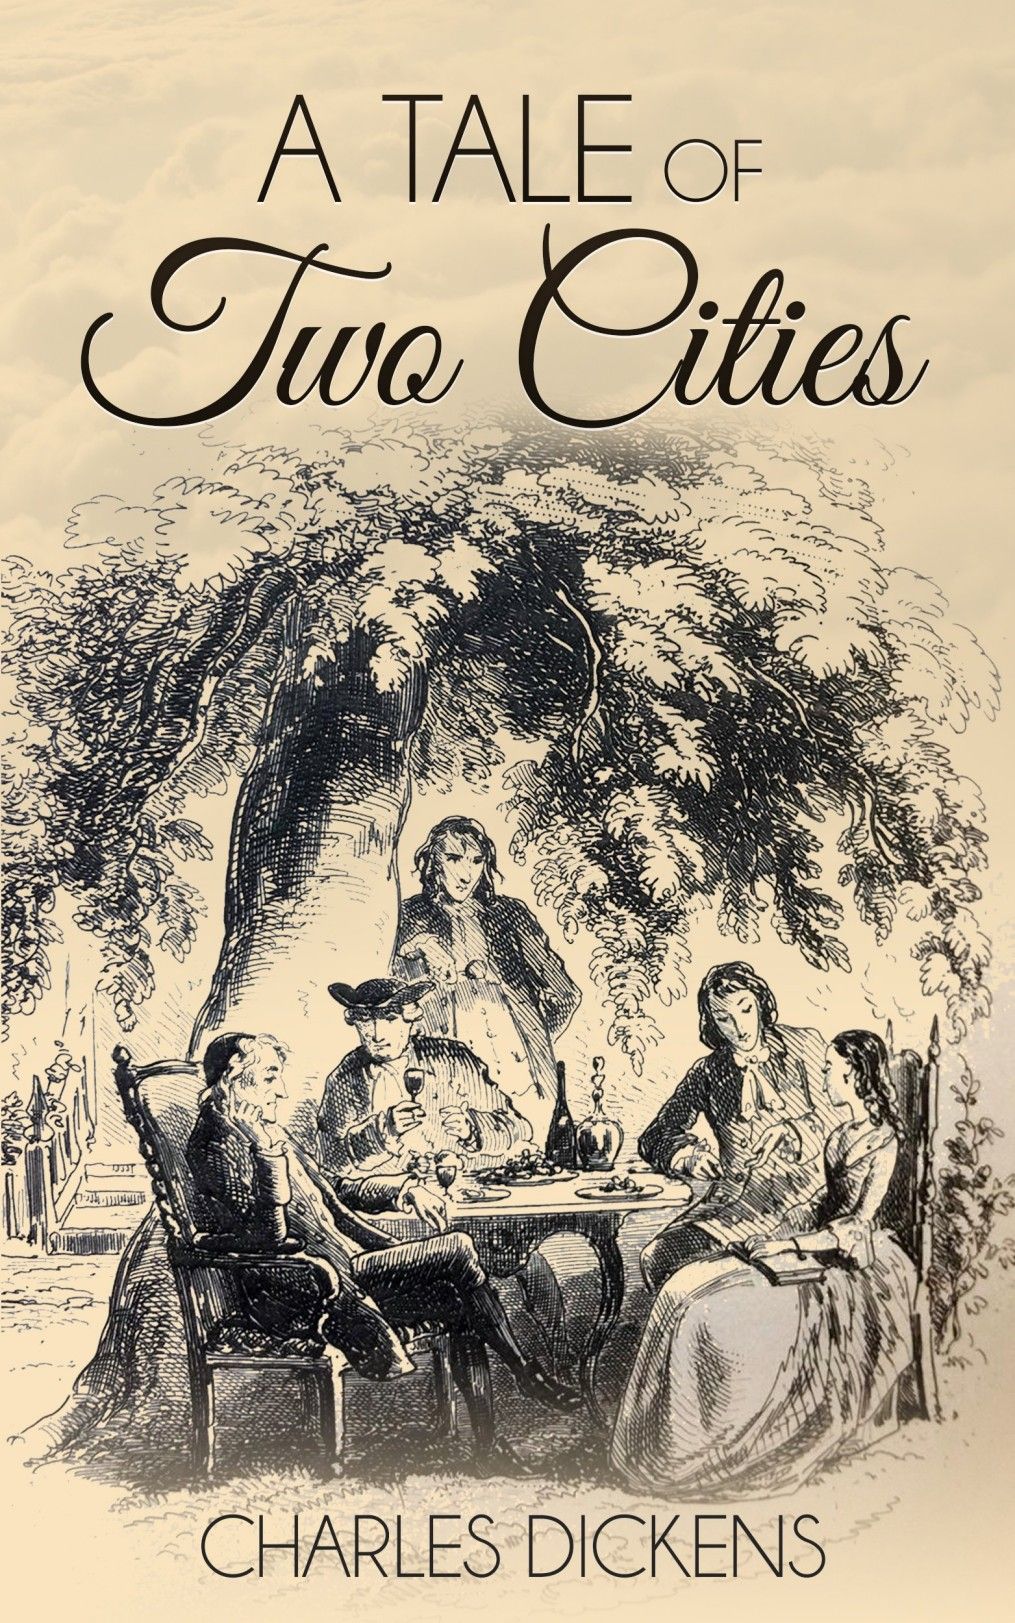 book review of a tale of two cities